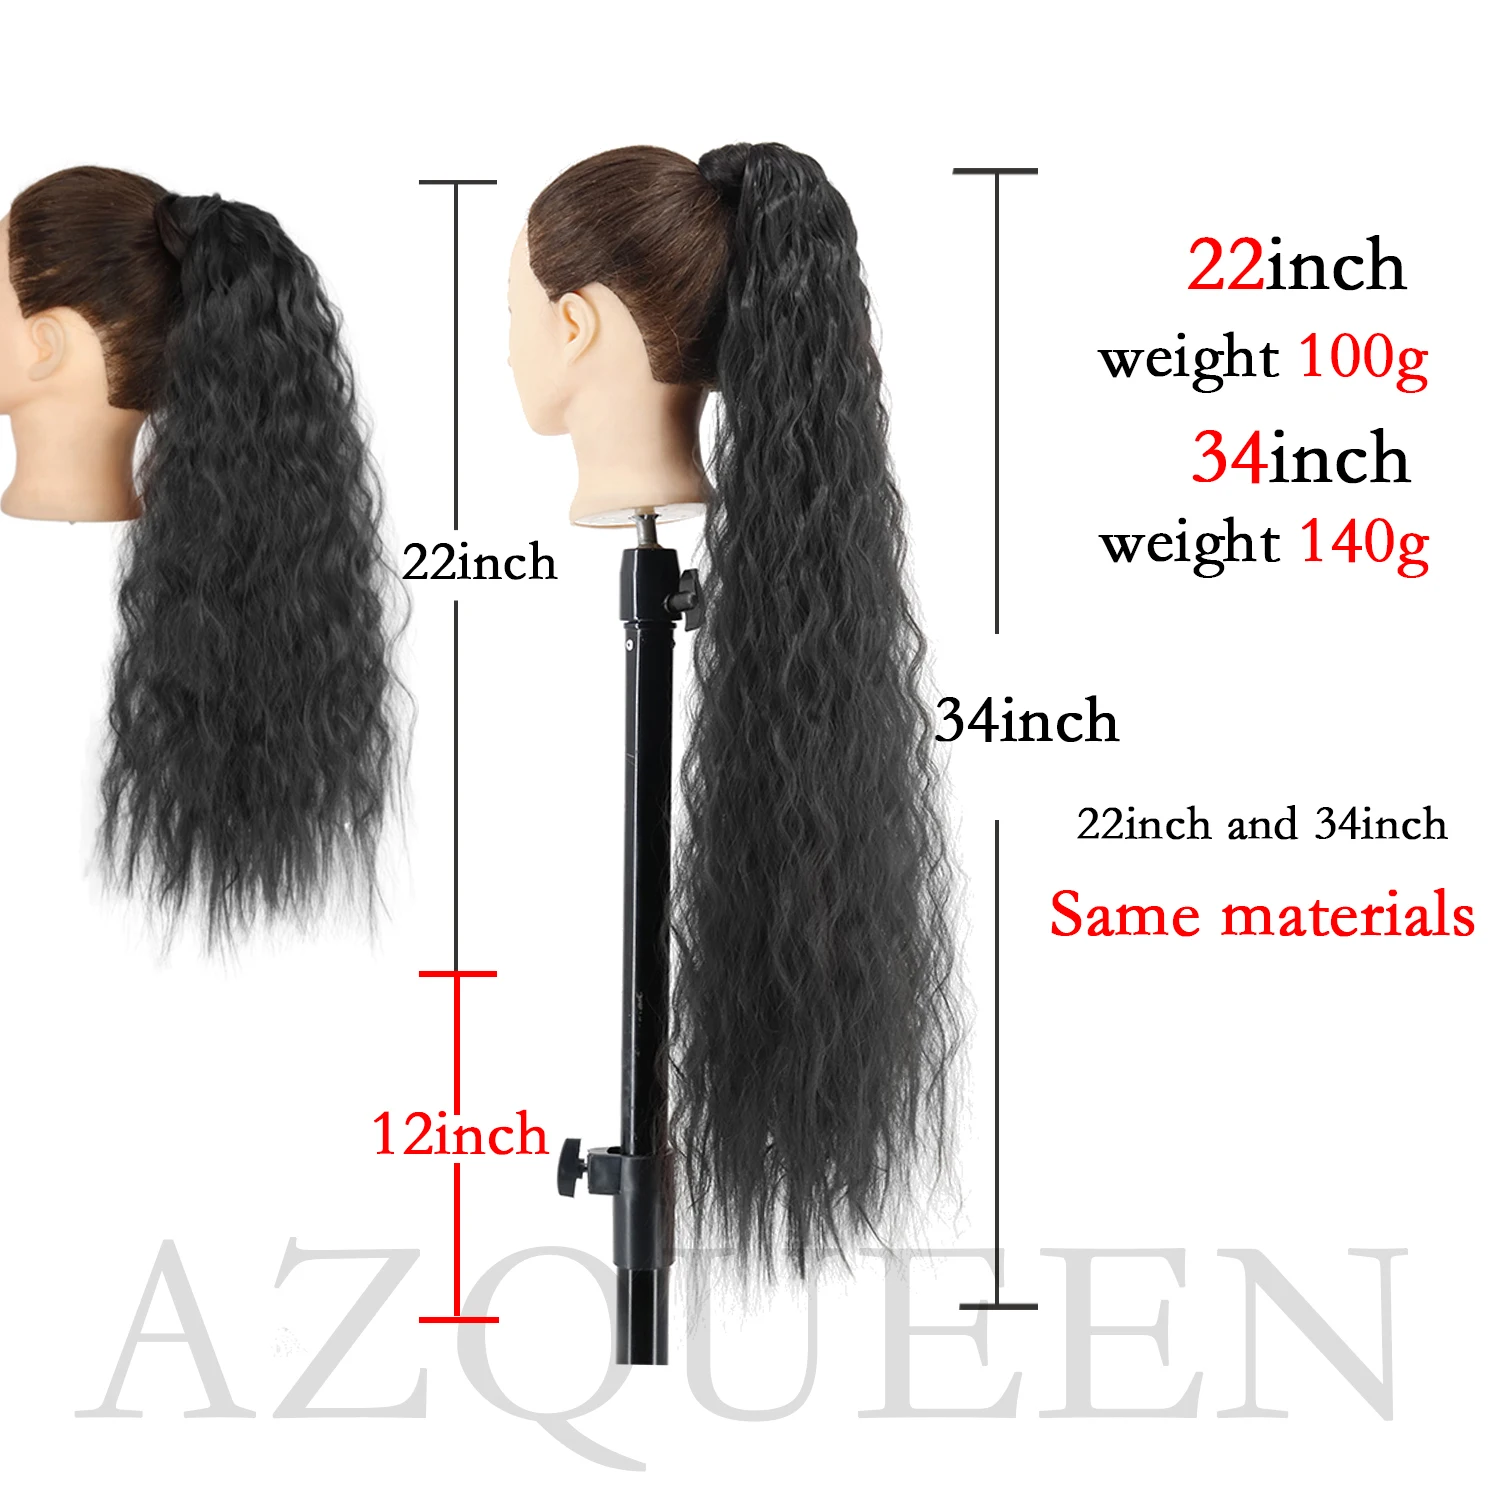 AZQUEEN Synthetic Corn Wavy Long Ponytail  Hairpiece Wrap on Clip Hair Extensions Ombre Brown Pony Tail Blonde Fack Hair 2